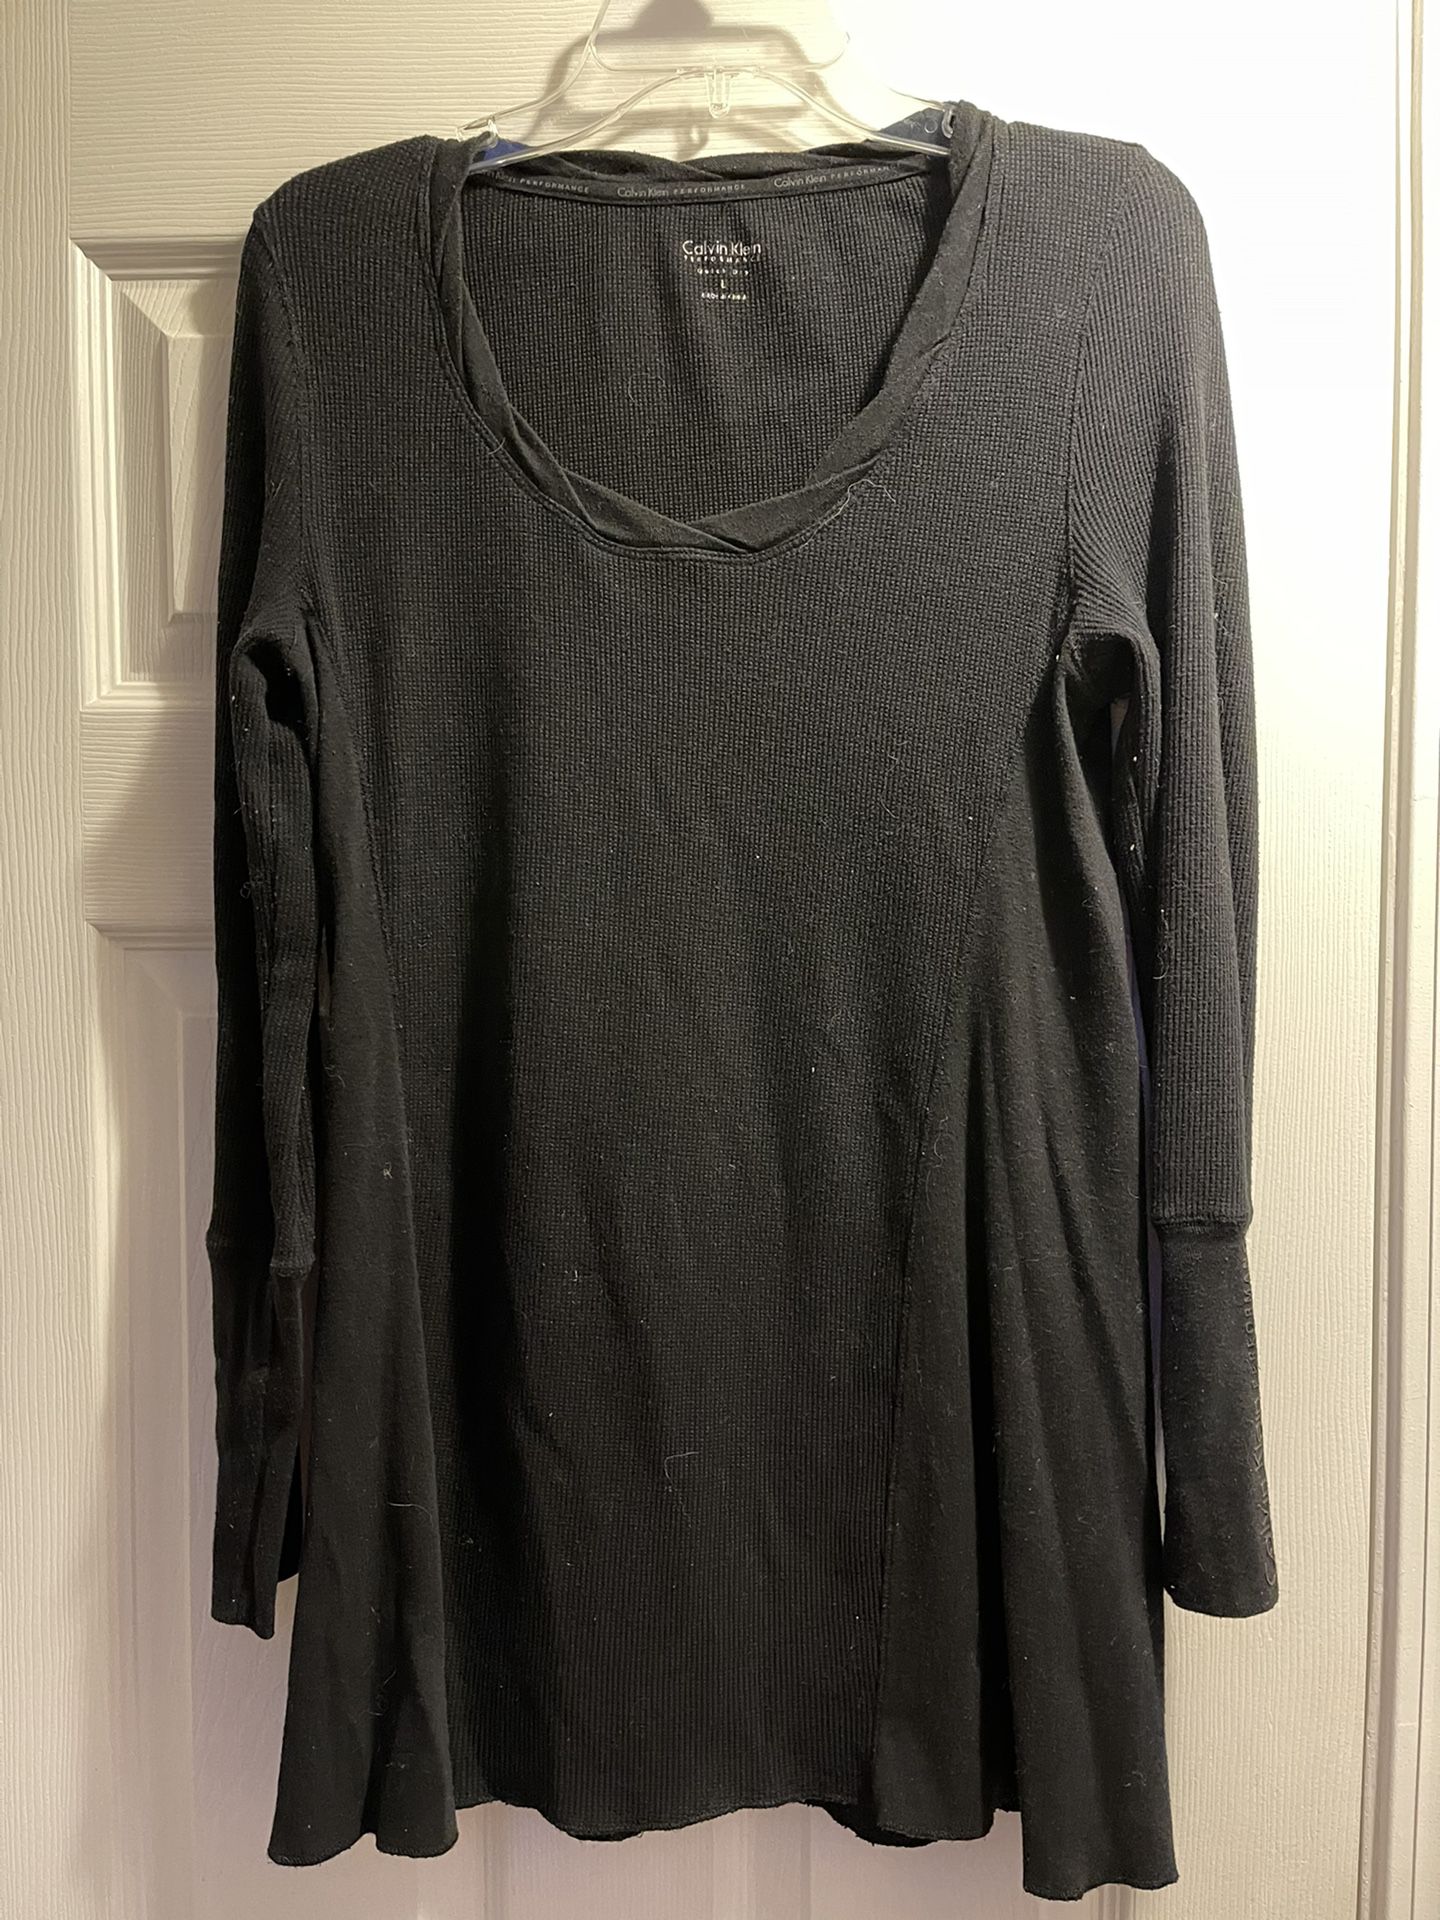 New Calvin Klein Performance Women's Thermal Long Sleeve Quick Dry Top Ladies large tunic length 